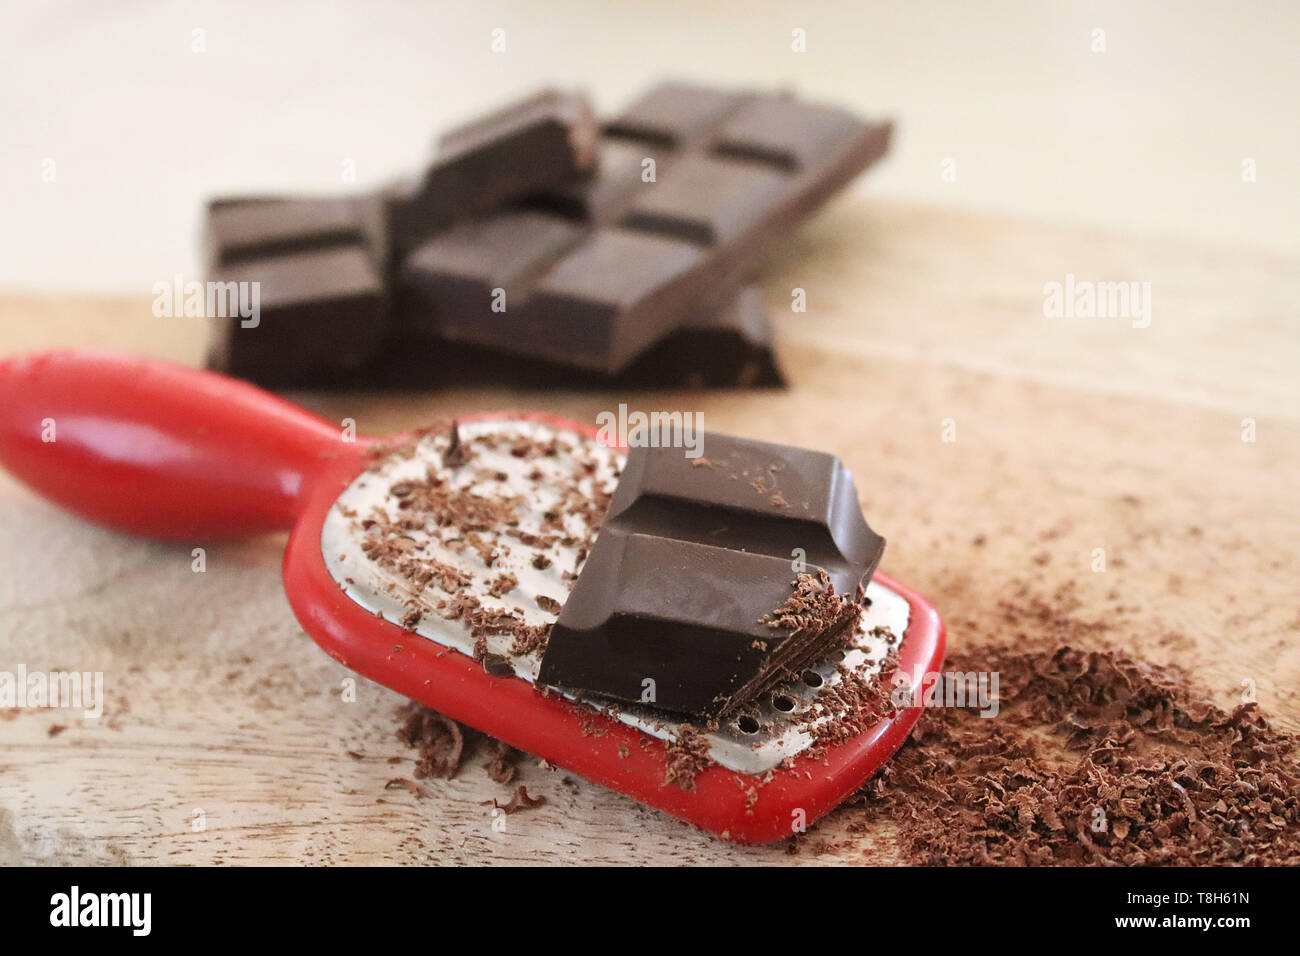 https://c8.alamy.com/comp/T8H61N/chocolate-grater-and-grated-chocolate-on-a-chopping-board-T8H61N.jpg